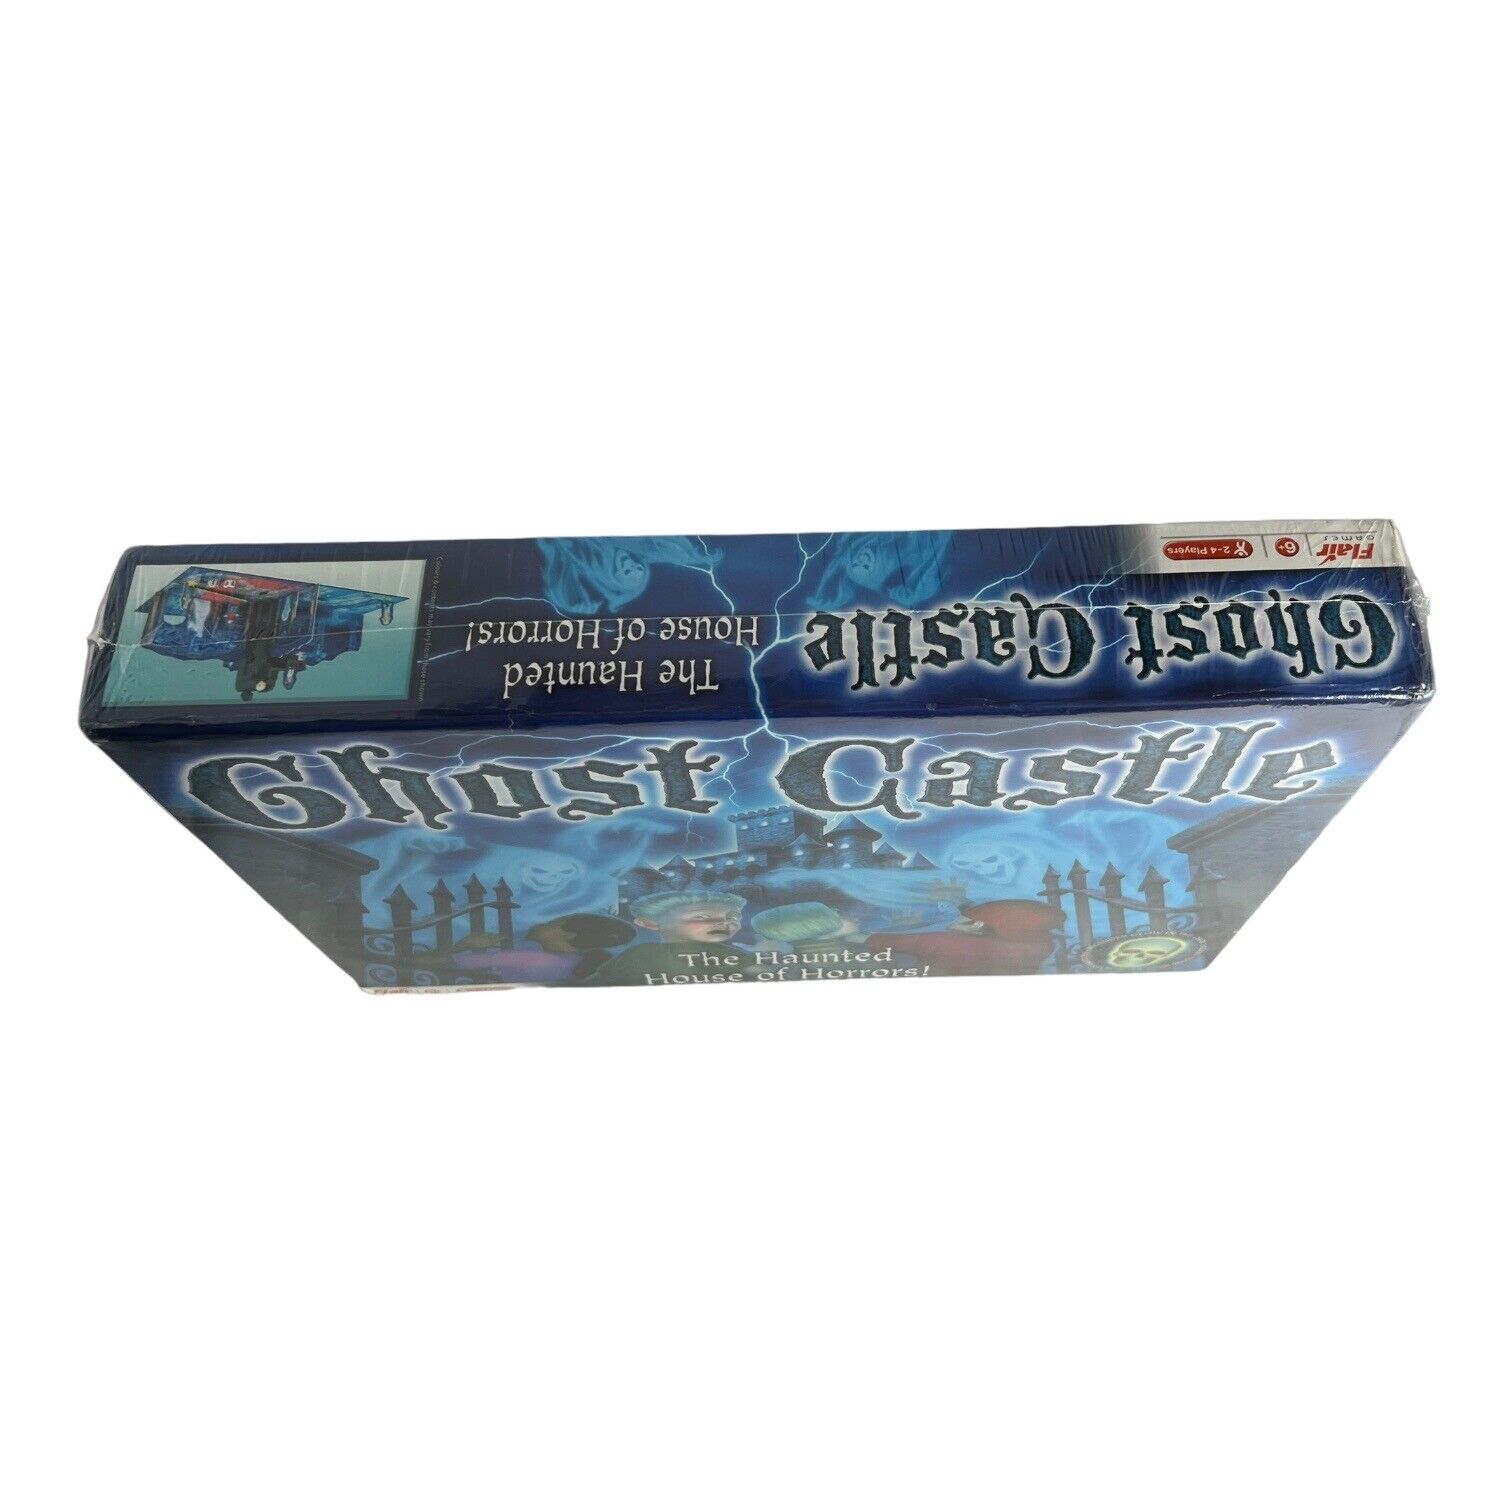 GHOST CASTLE The HAUNTED HOUSE of HORRORS NEW Factory SEALED BOARD GAME Flair ! Flaire Leisure Products Items # 36000 - фотография #21